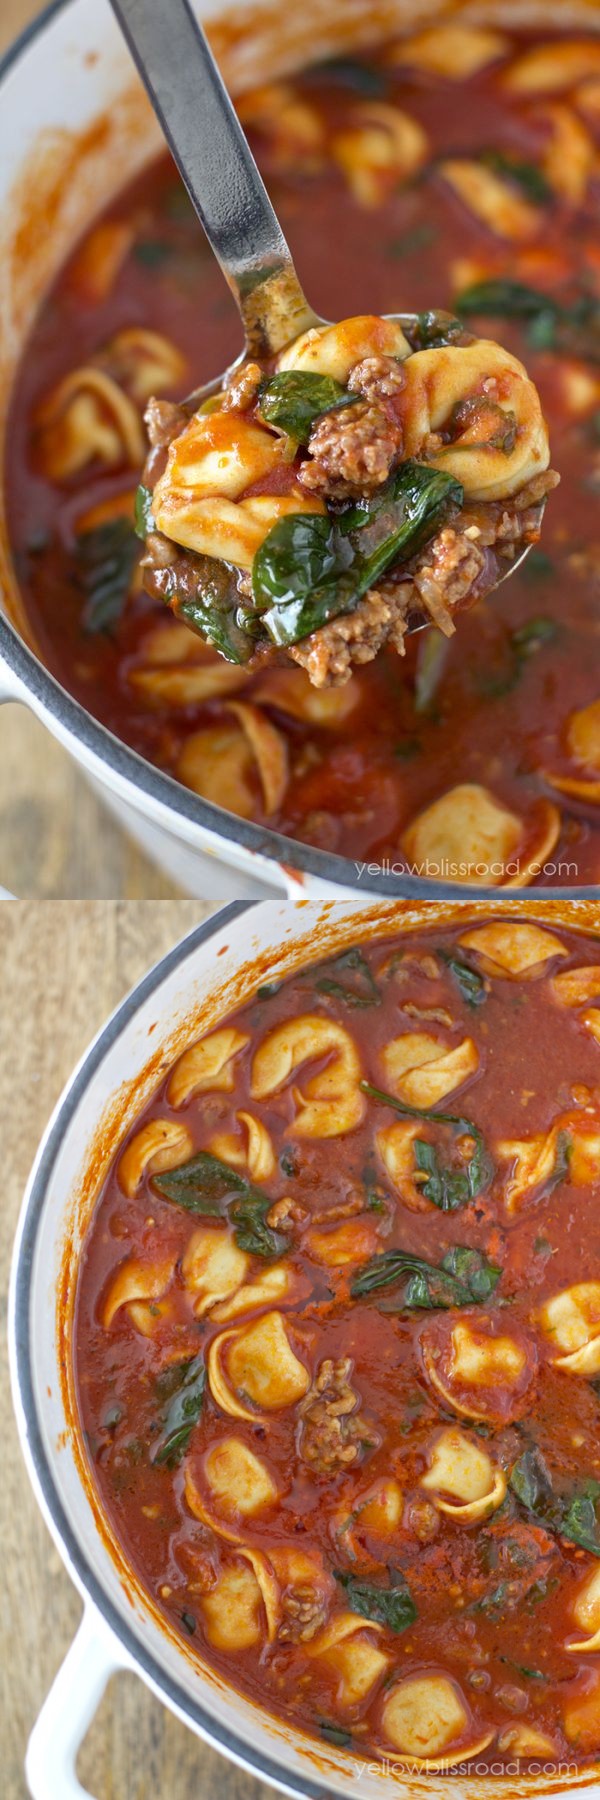 Tortellini Tomato Soup with Italian Sausage & Spinach